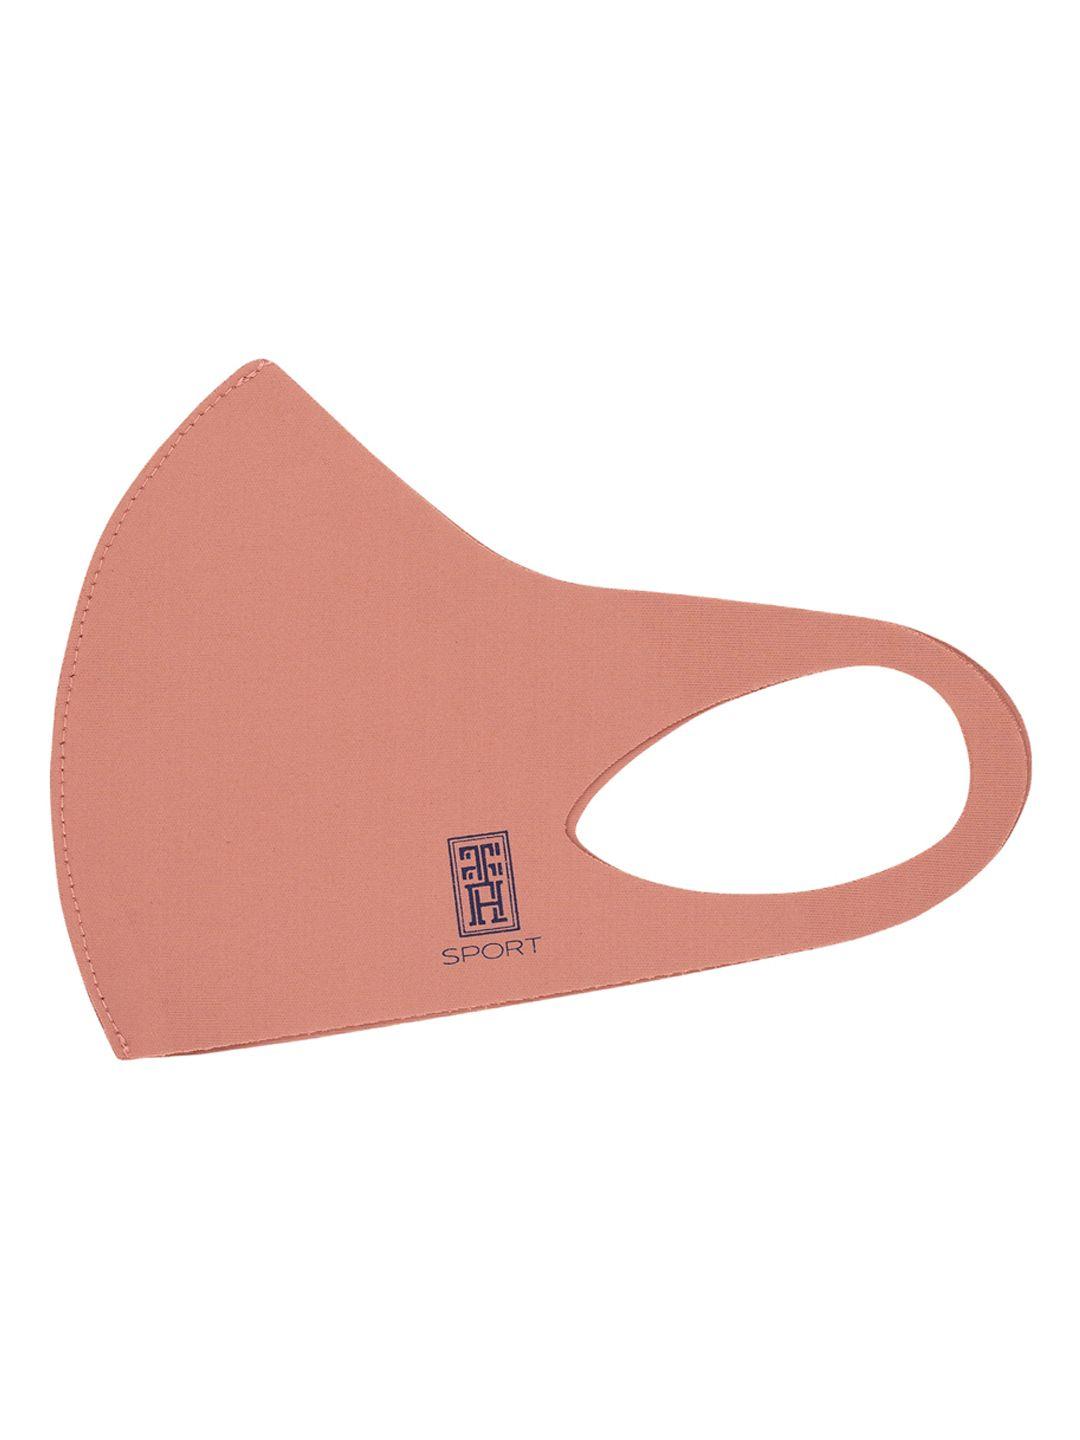 the tie hub kids pink solid single ply reusable sports outdoor cloth mask